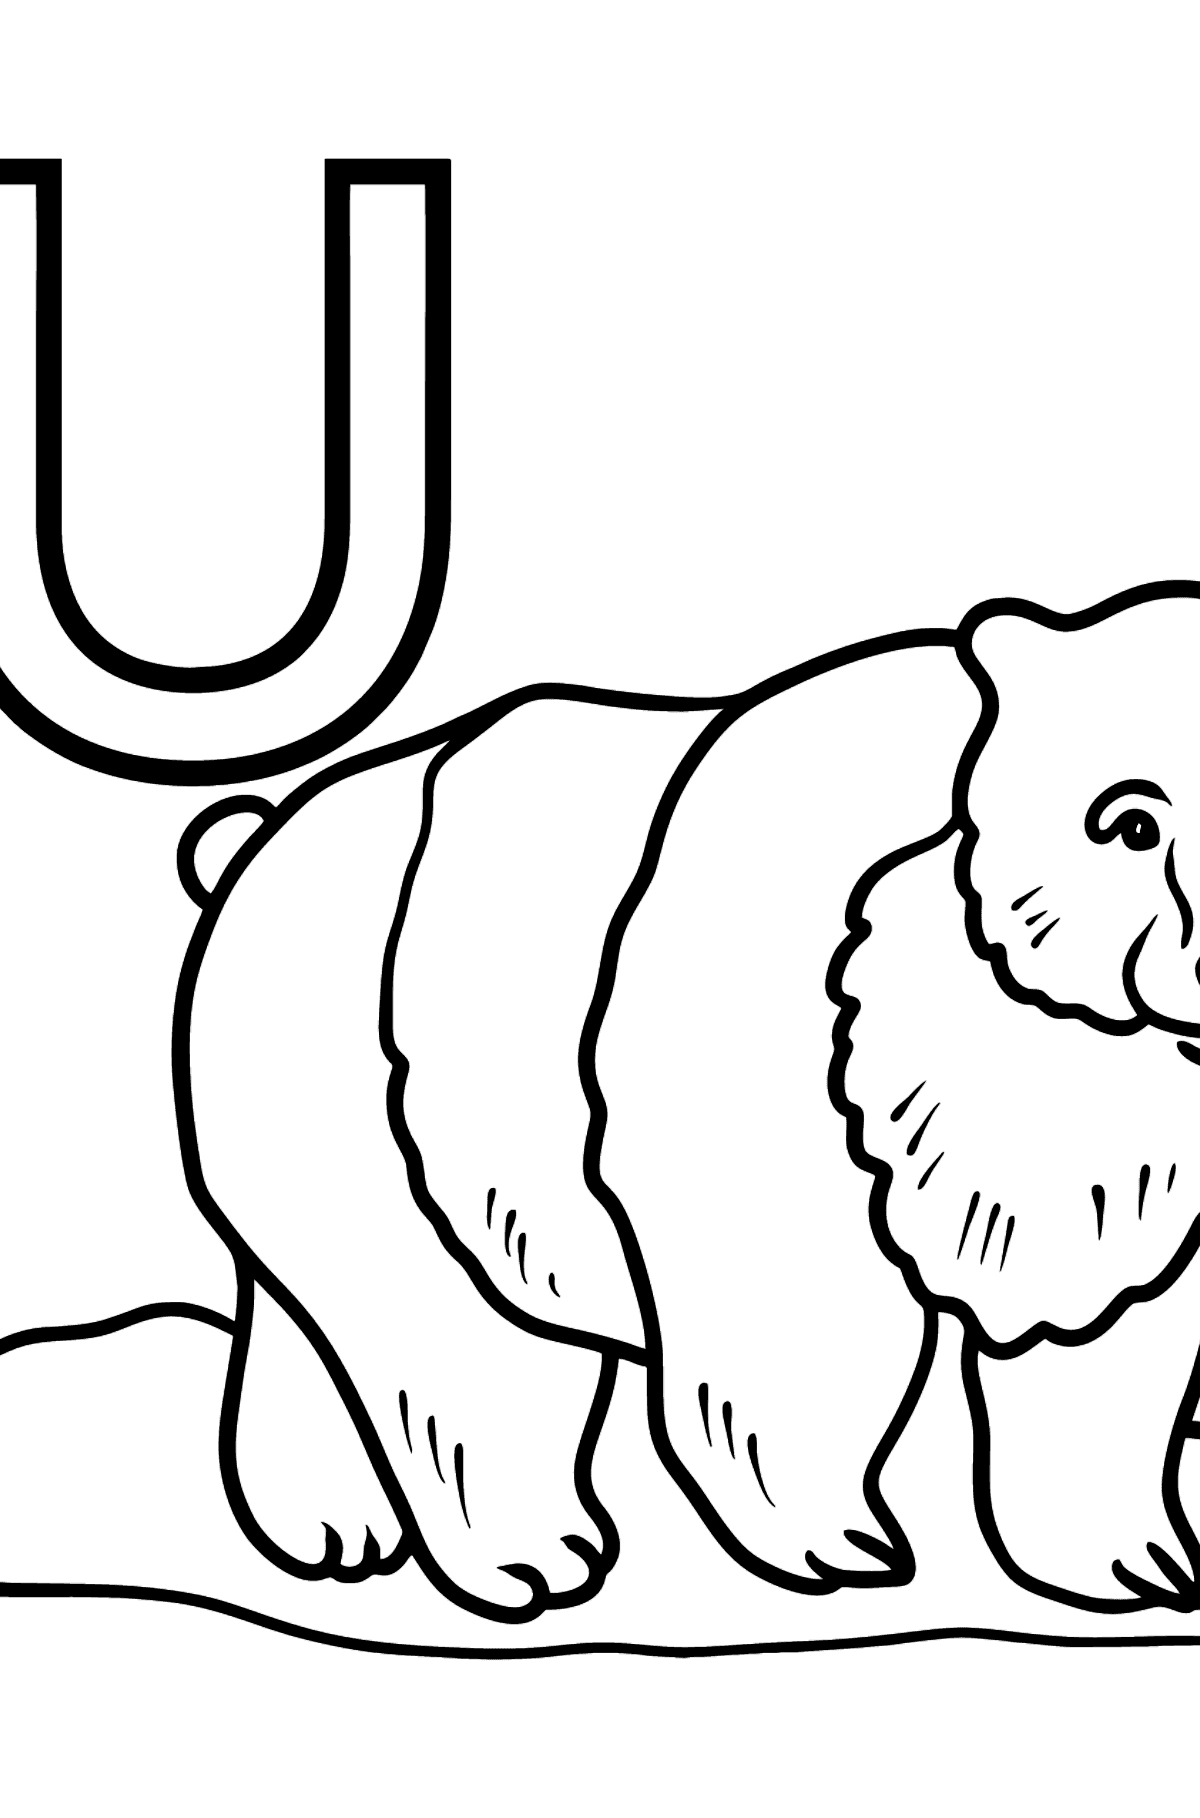 Portuguese Letter U coloring pages - URSO - Coloring Pages for Kids